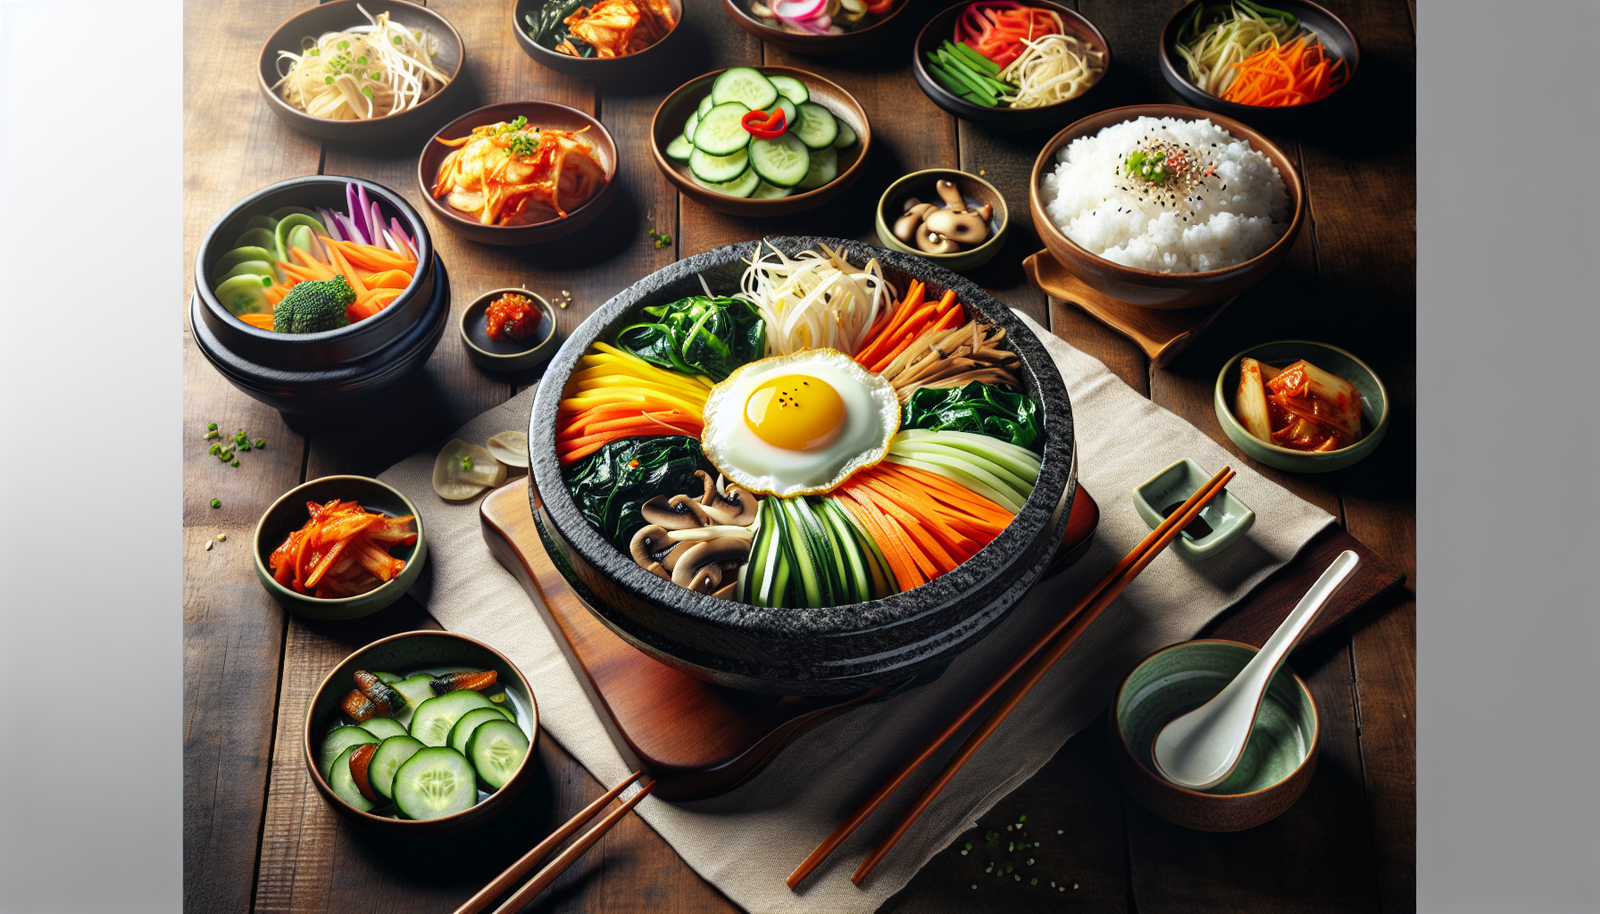 Can You Suggest Some Vegetarian-friendly Korean Dishes?